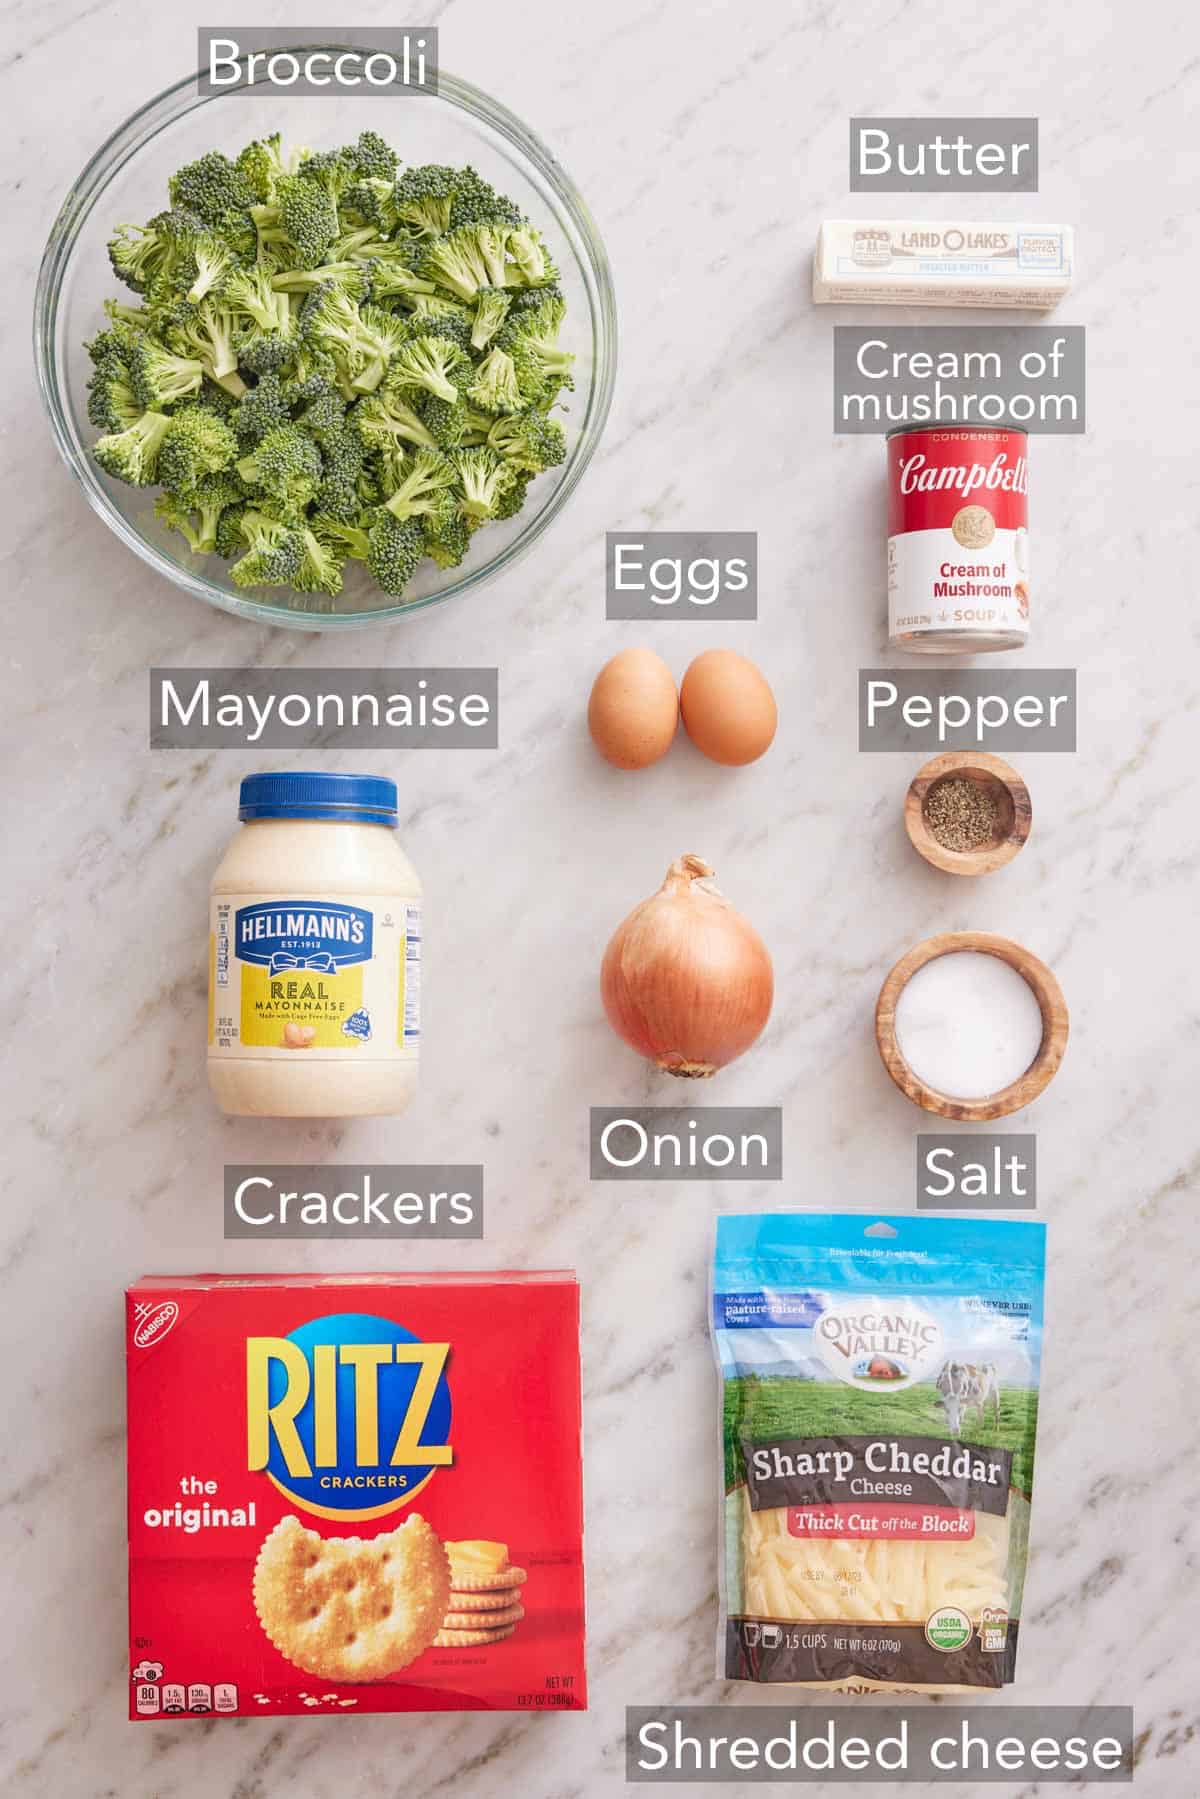 Ingredients needed to make broccoli casserole.